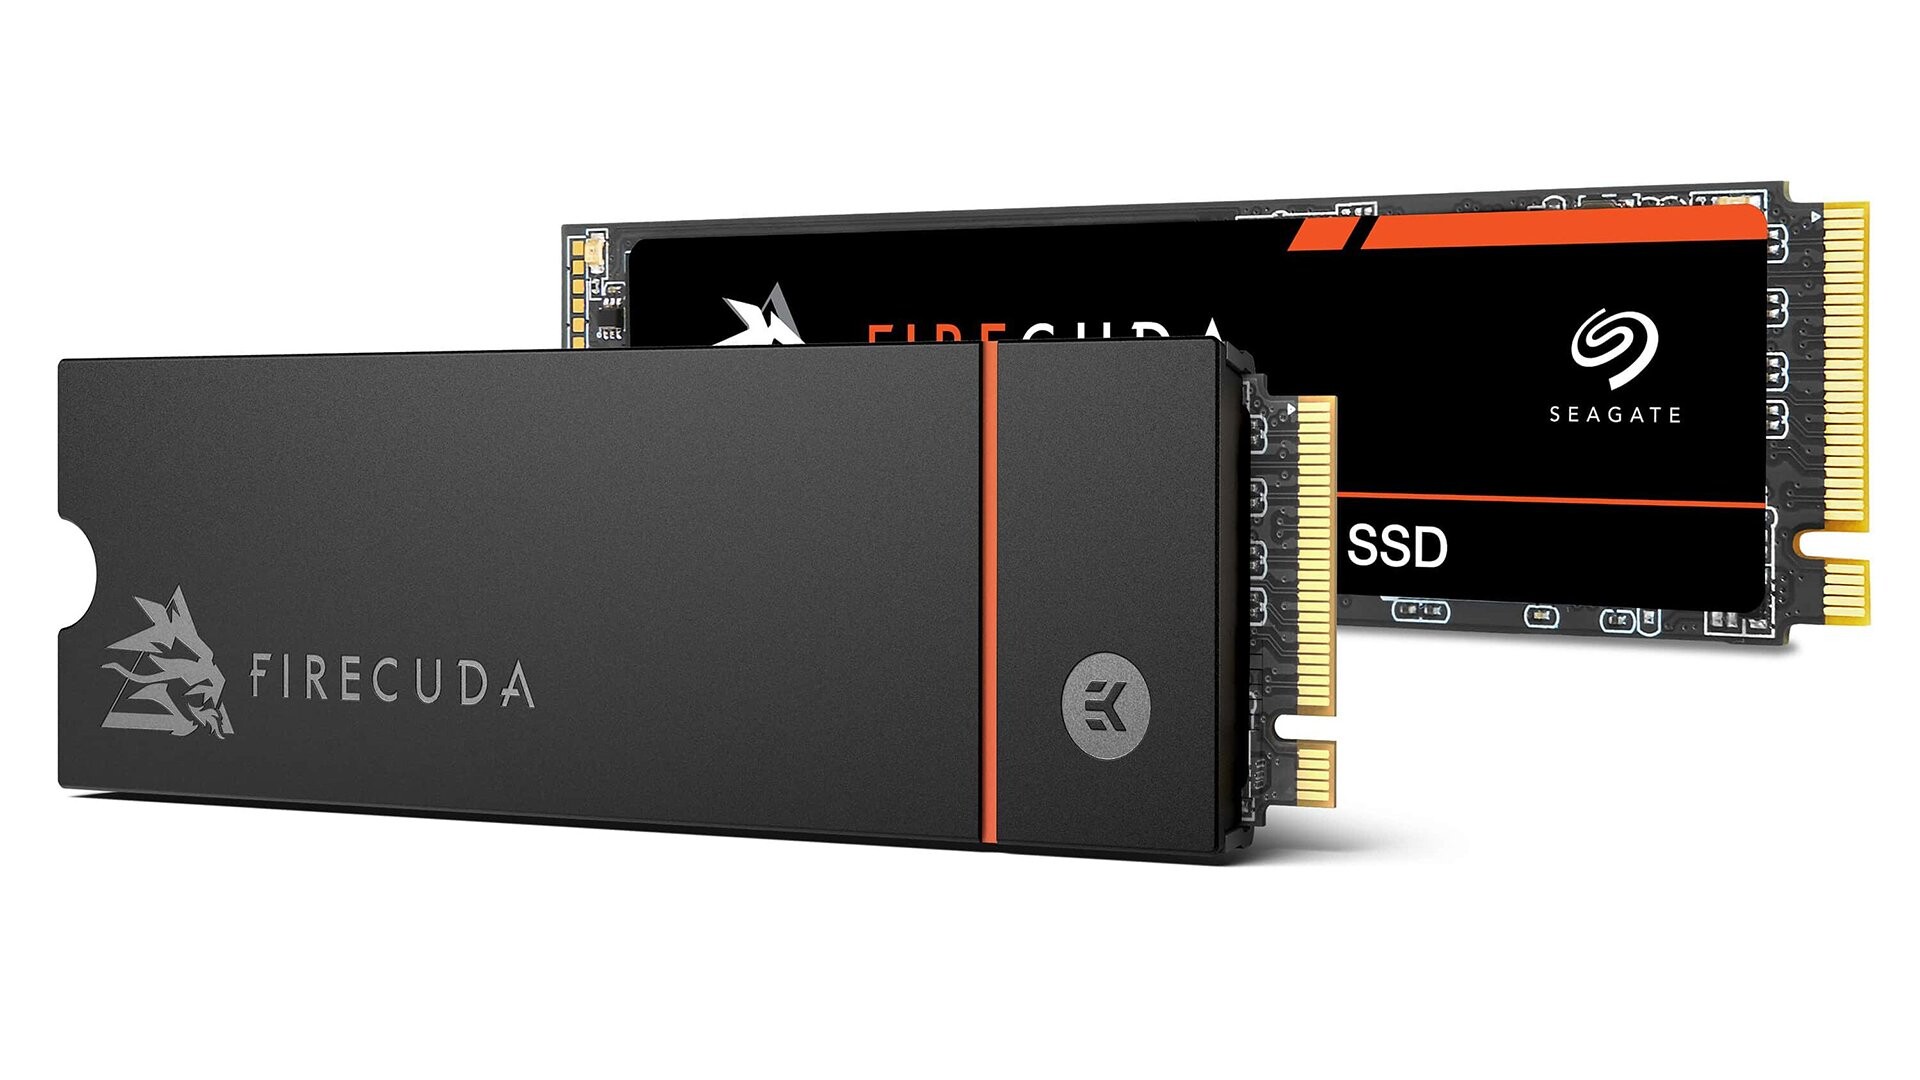 Seagate FireCuda 530 1TB NVMe SSD Review Sustained Write King - Page 3 of 3